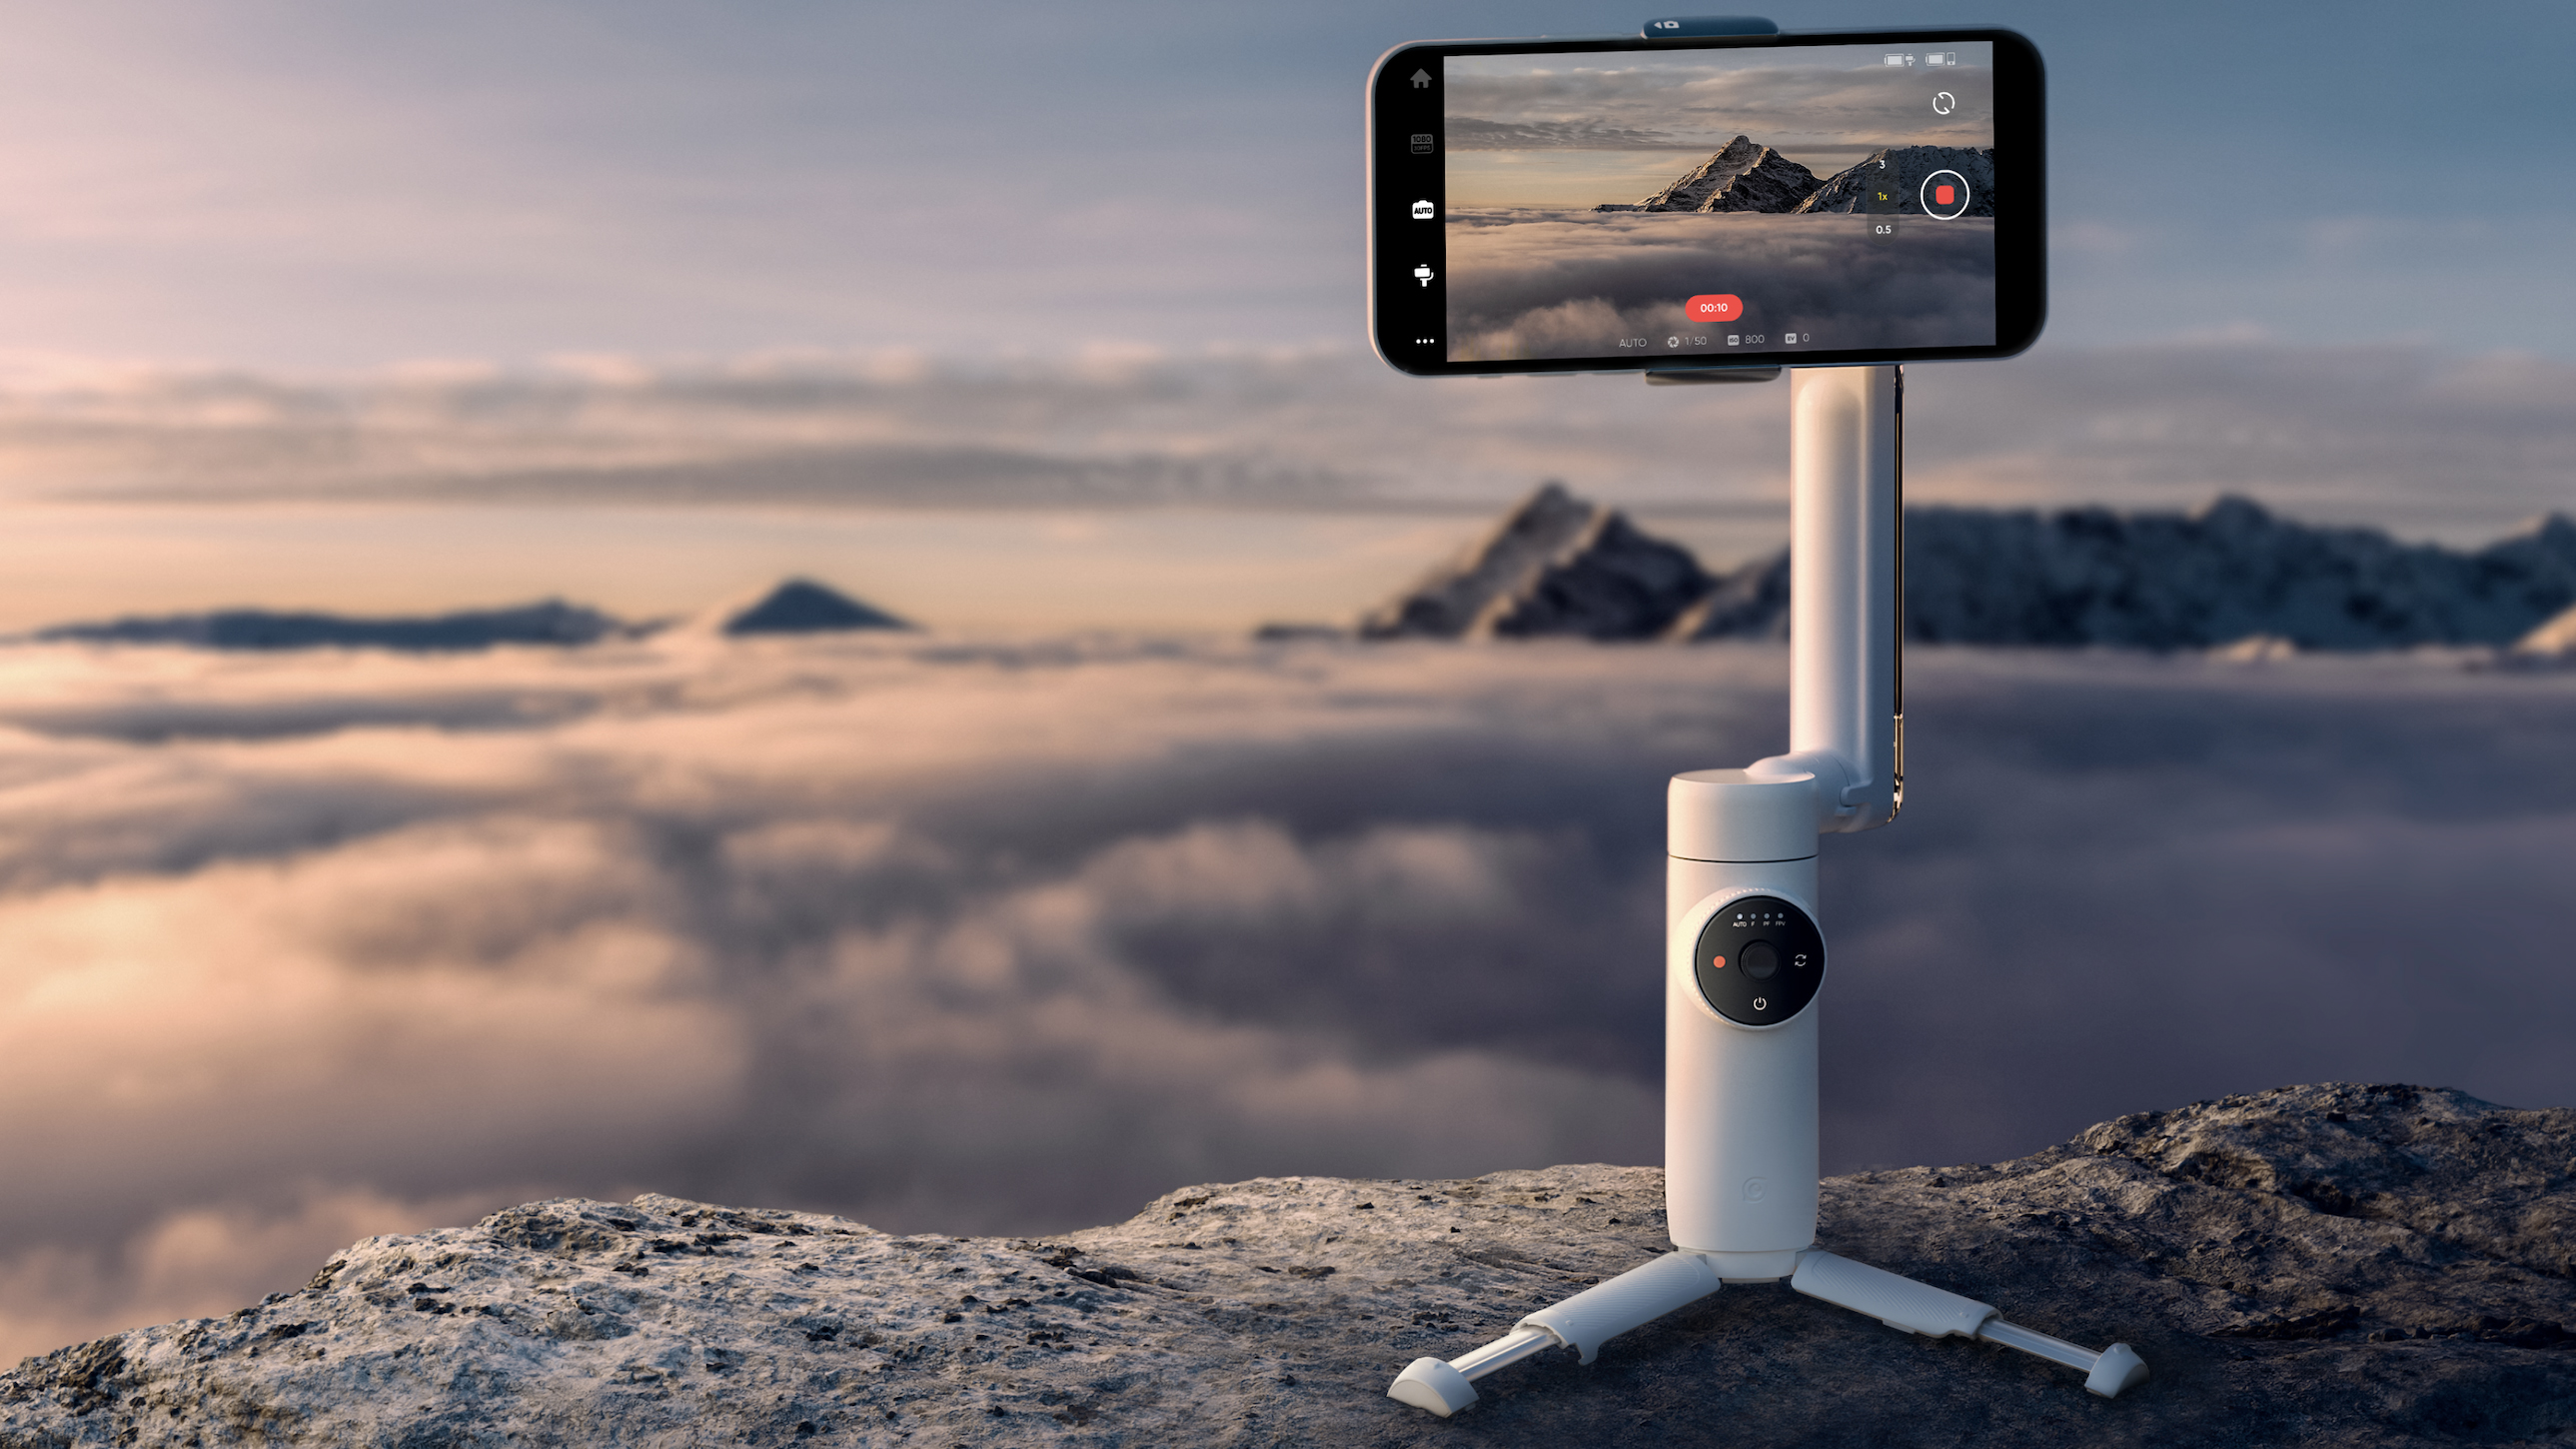 The Insta360 Flow is a DJI smartphone gimbal rival with a clever bonus